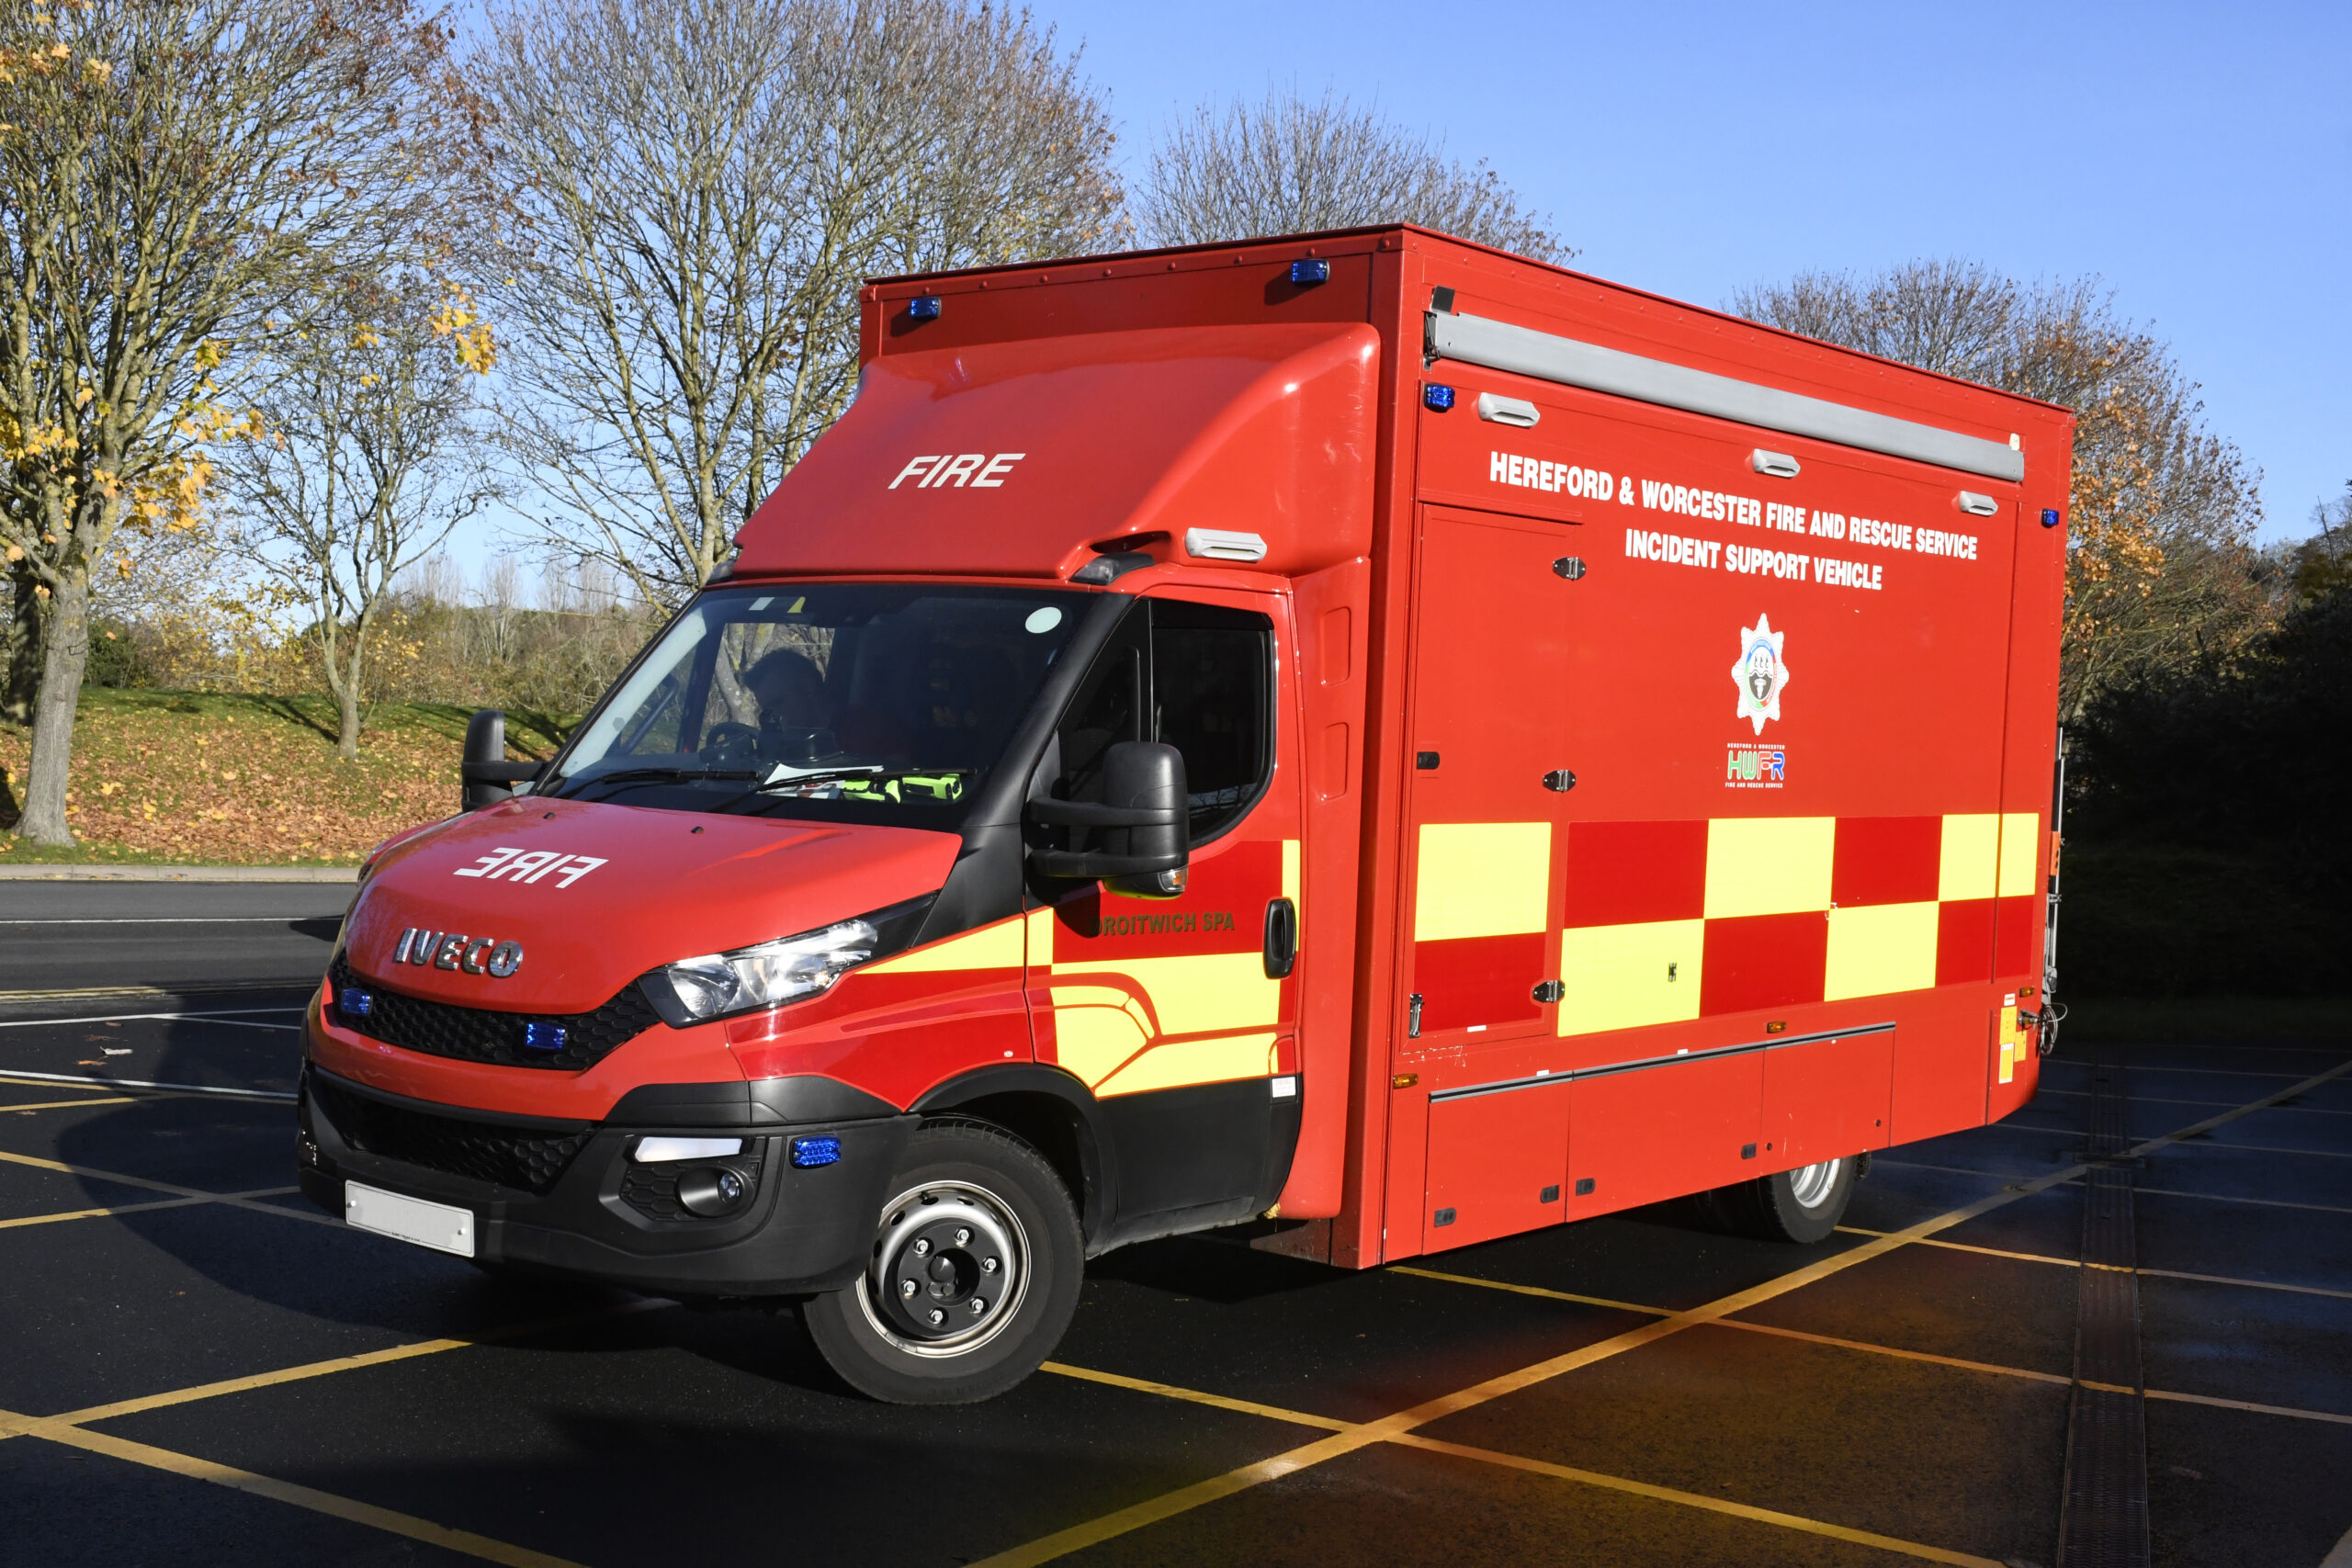 Incident Support Vehicle